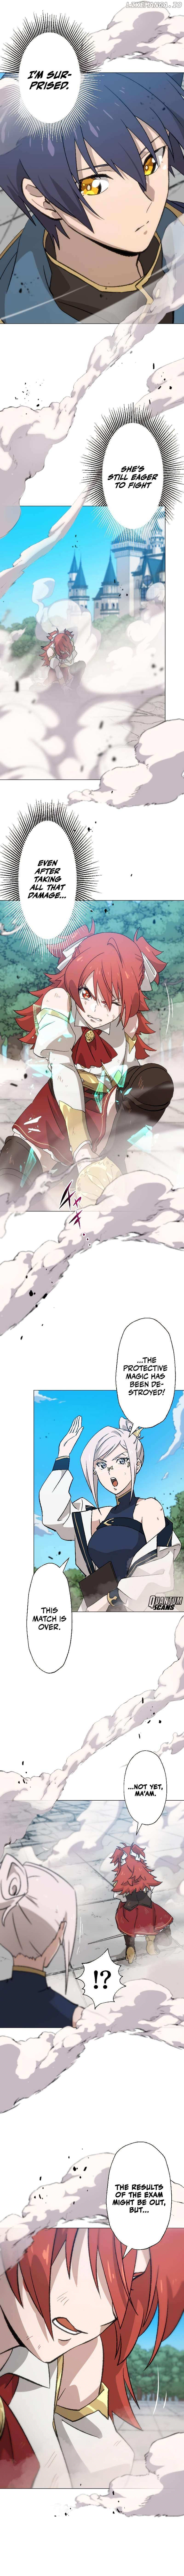 The Reincarnated Magician with Inferior Eyes ~The Oppressed Ex-Hero Survives the Future World with Ease~ Chapter 12 - page 7